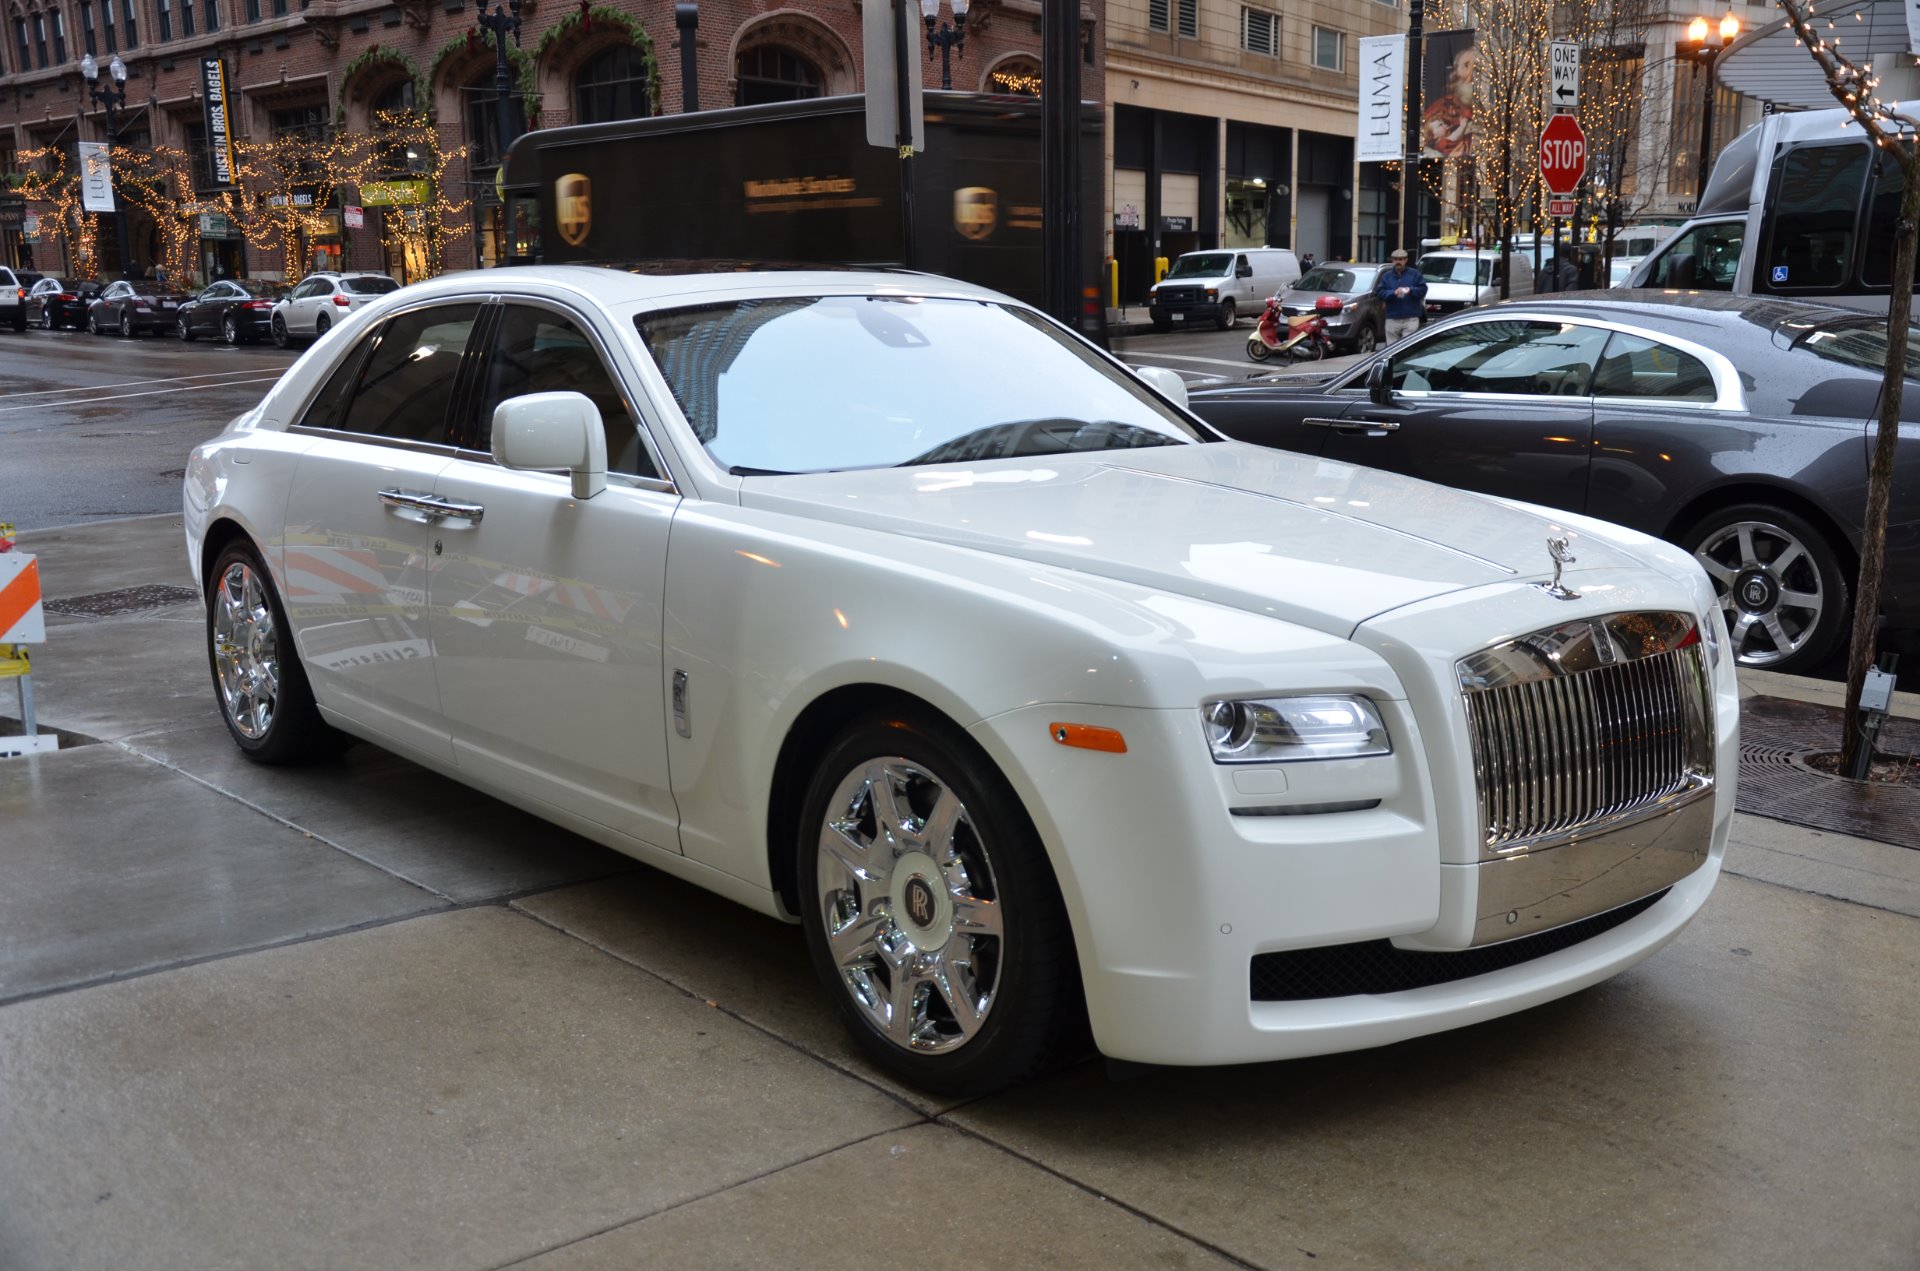 Used 2011 RollsRoyce Ghost For Sale Sold  Bentley Gold Coast Chicago  Stock 49426